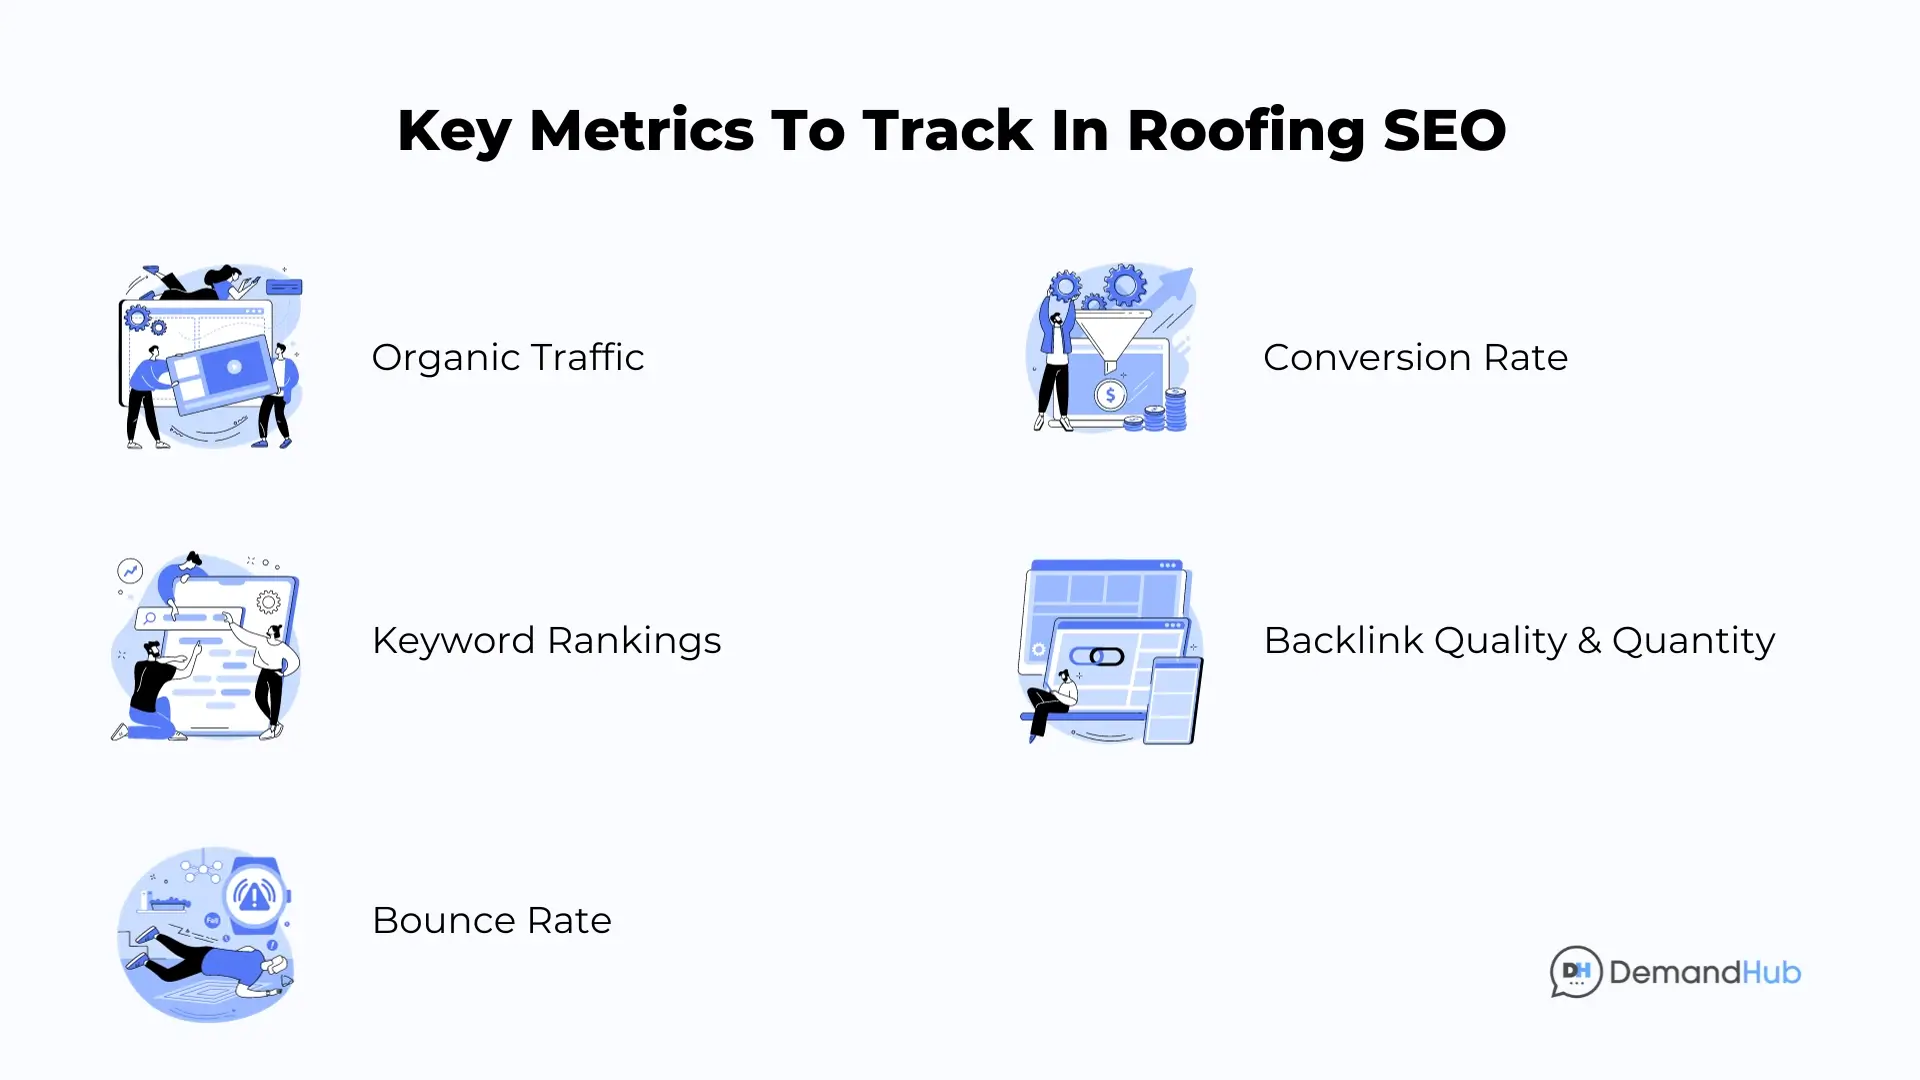 Key Metrics to Track in Roofing SEO